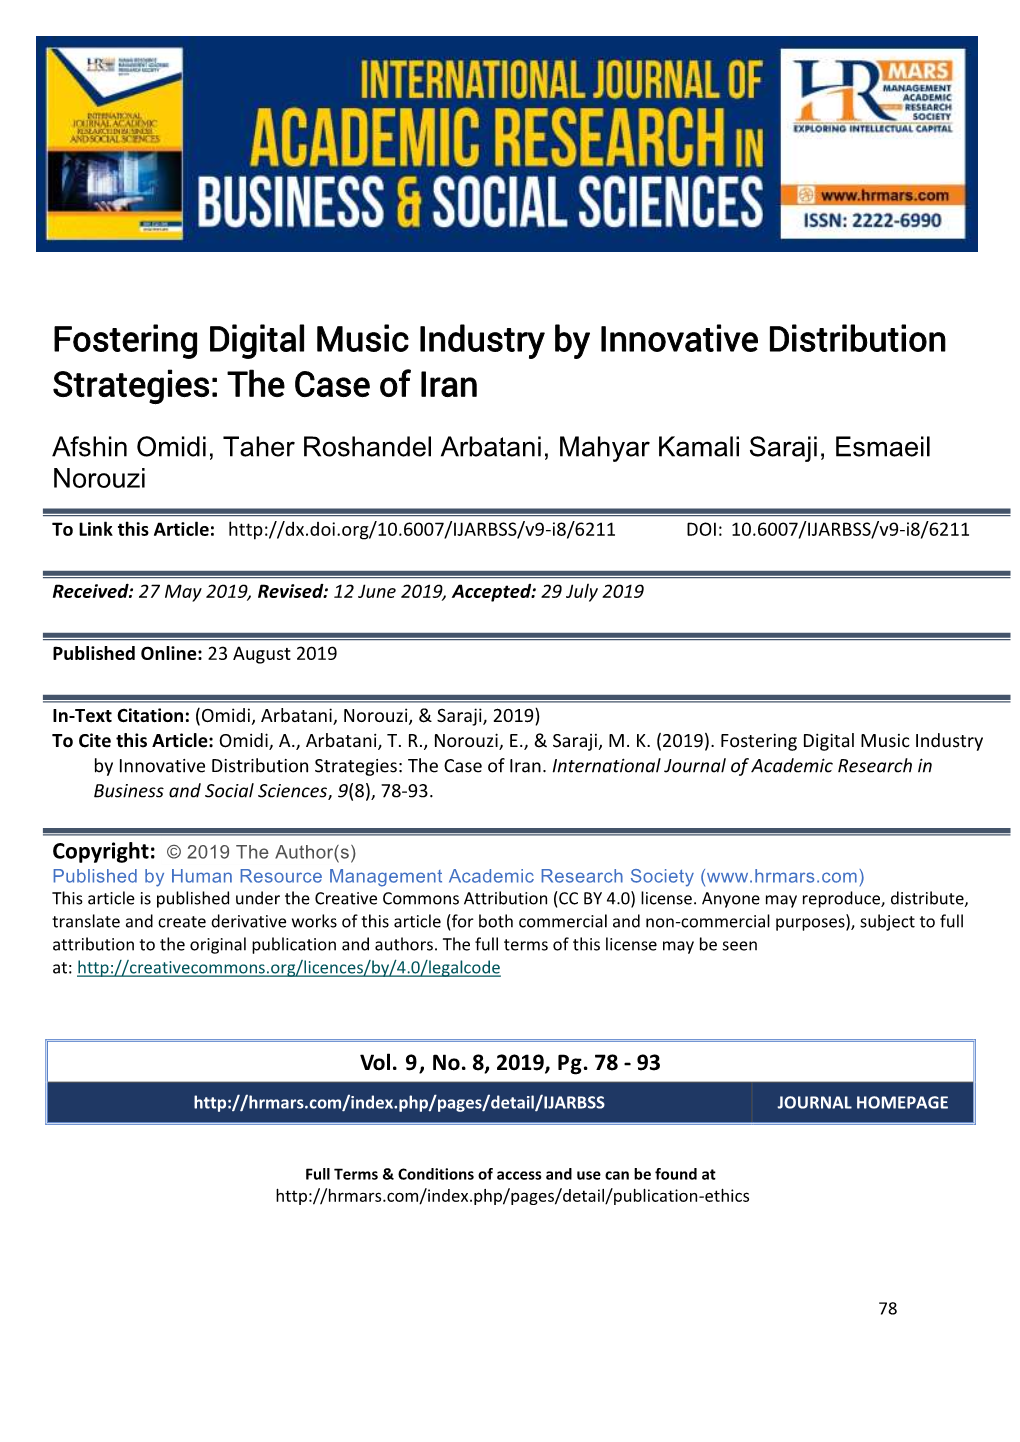 Fostering Digital Music Industry by Innovative Distribution Strategies: the Case of Iran